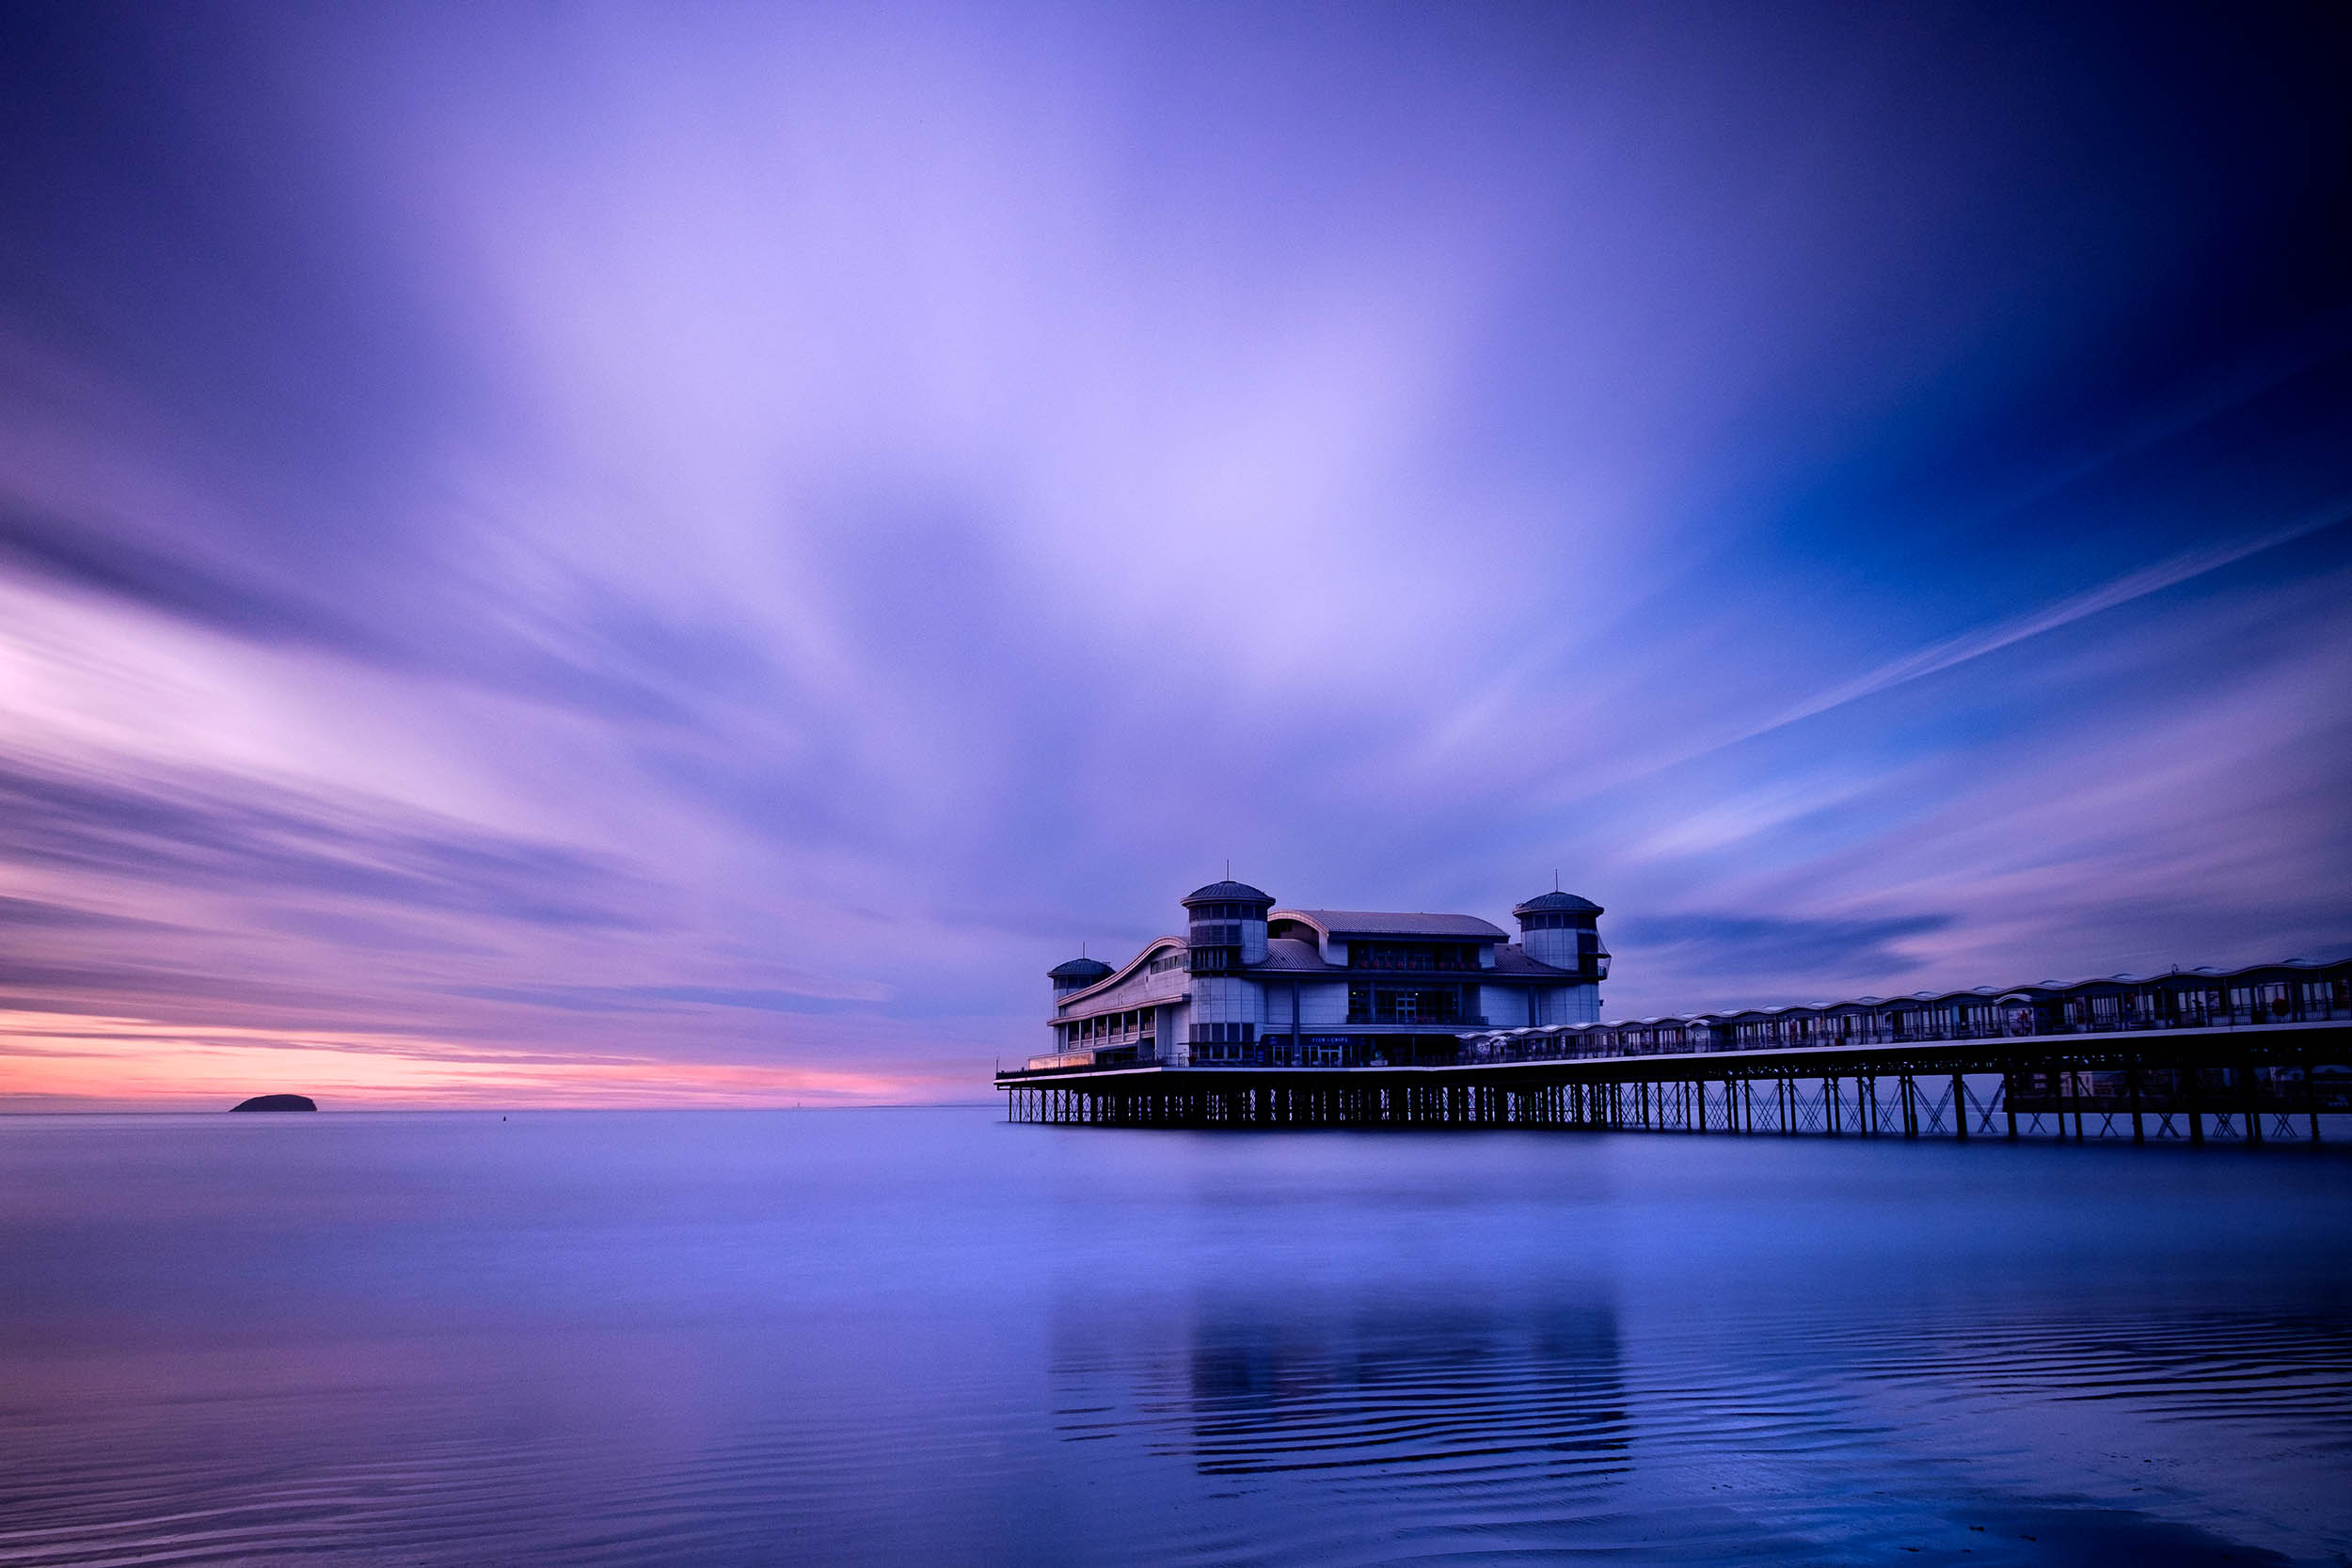 Long Exposure photography workshops at Weston-Super-Mare